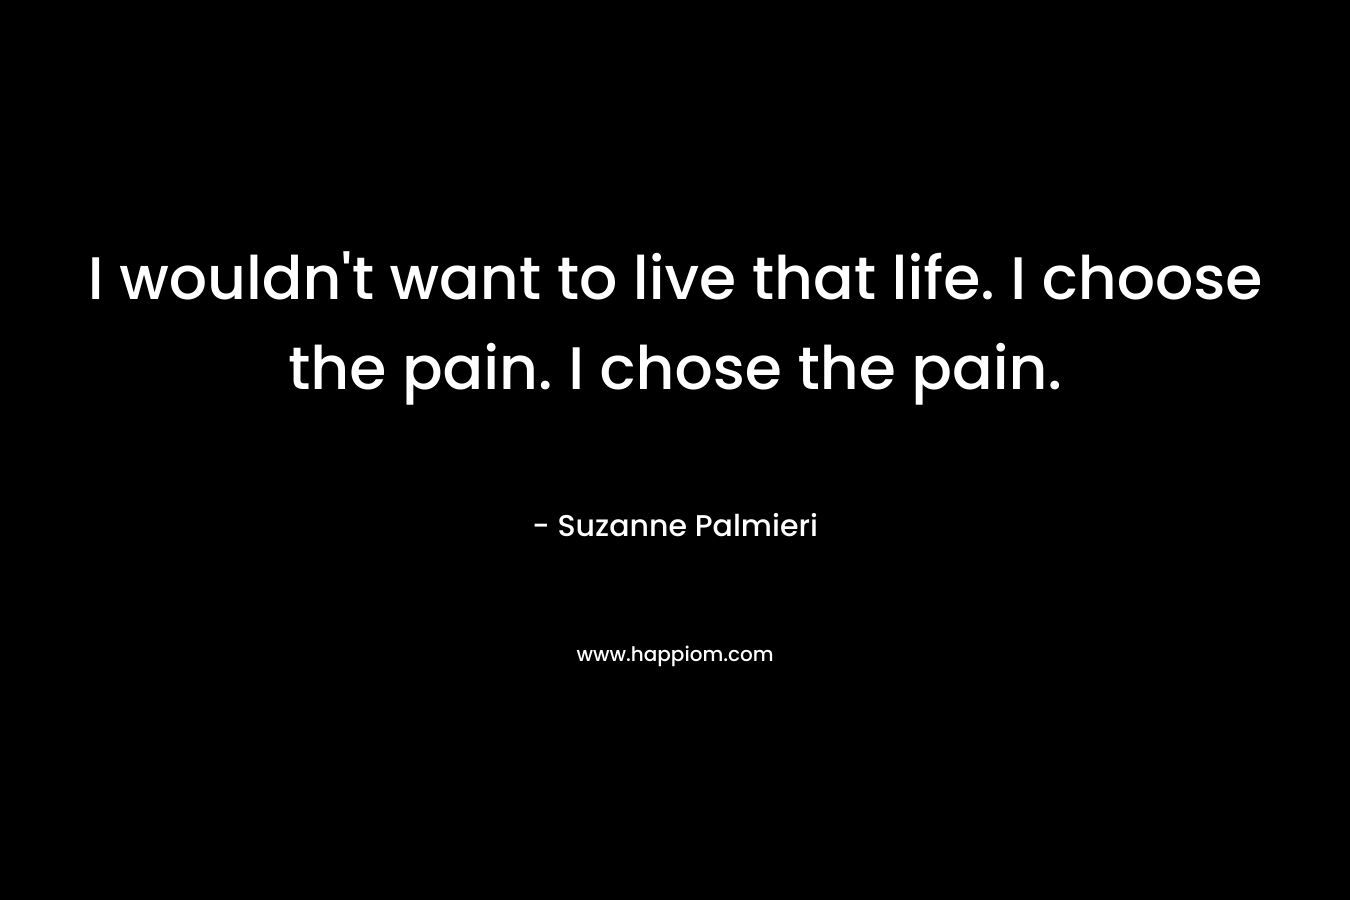 I wouldn’t want to live that life. I choose the pain. I chose the pain. – Suzanne Palmieri